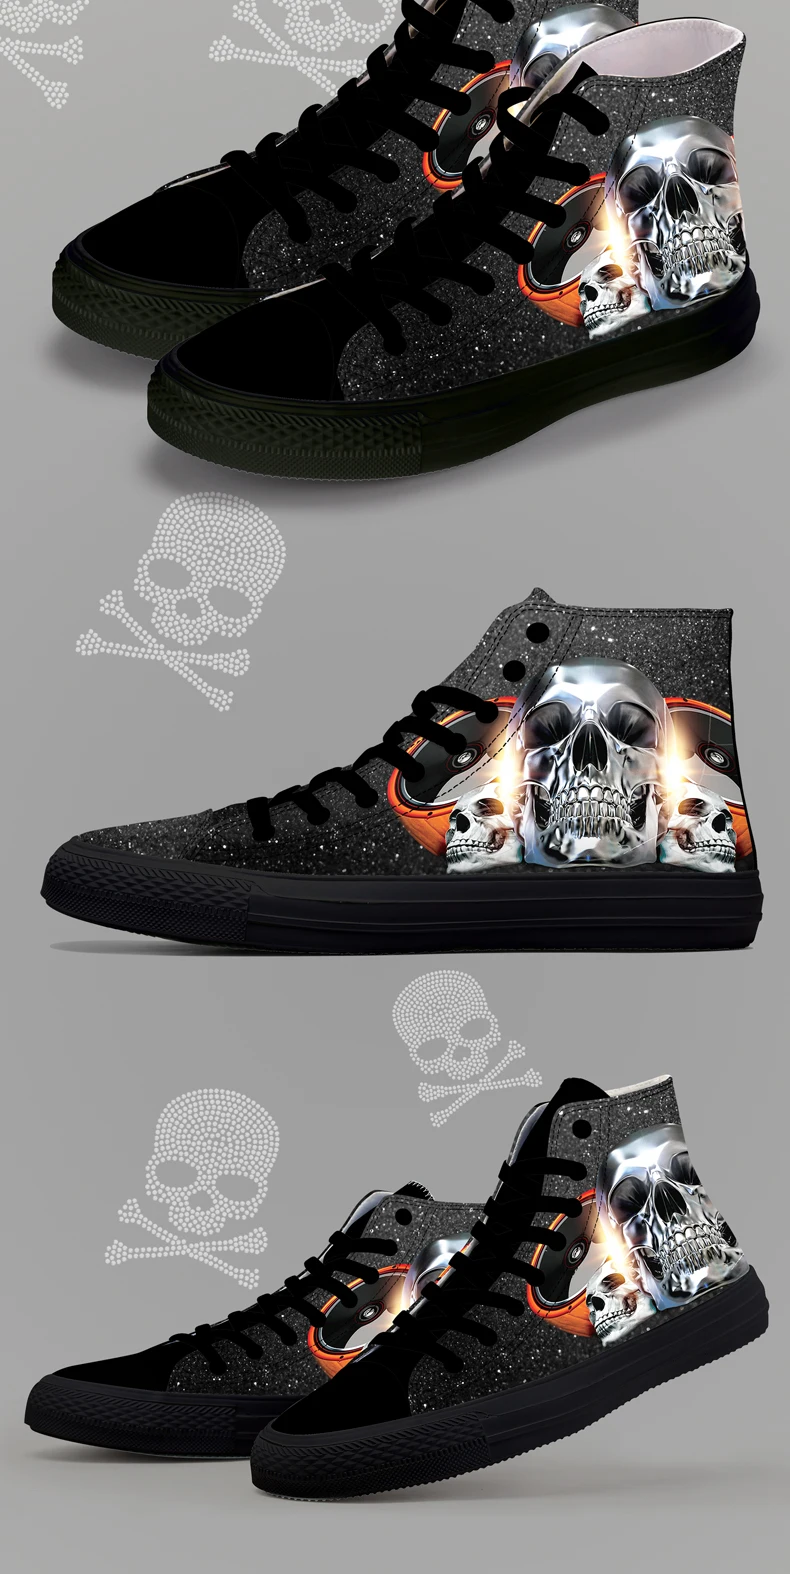 FIRST DANCE Casual Black Punk Skull High Top Shoes Men Classic High Canvas Shoes Fashion 3D Street Nice Printed Casual Shoes Men 10